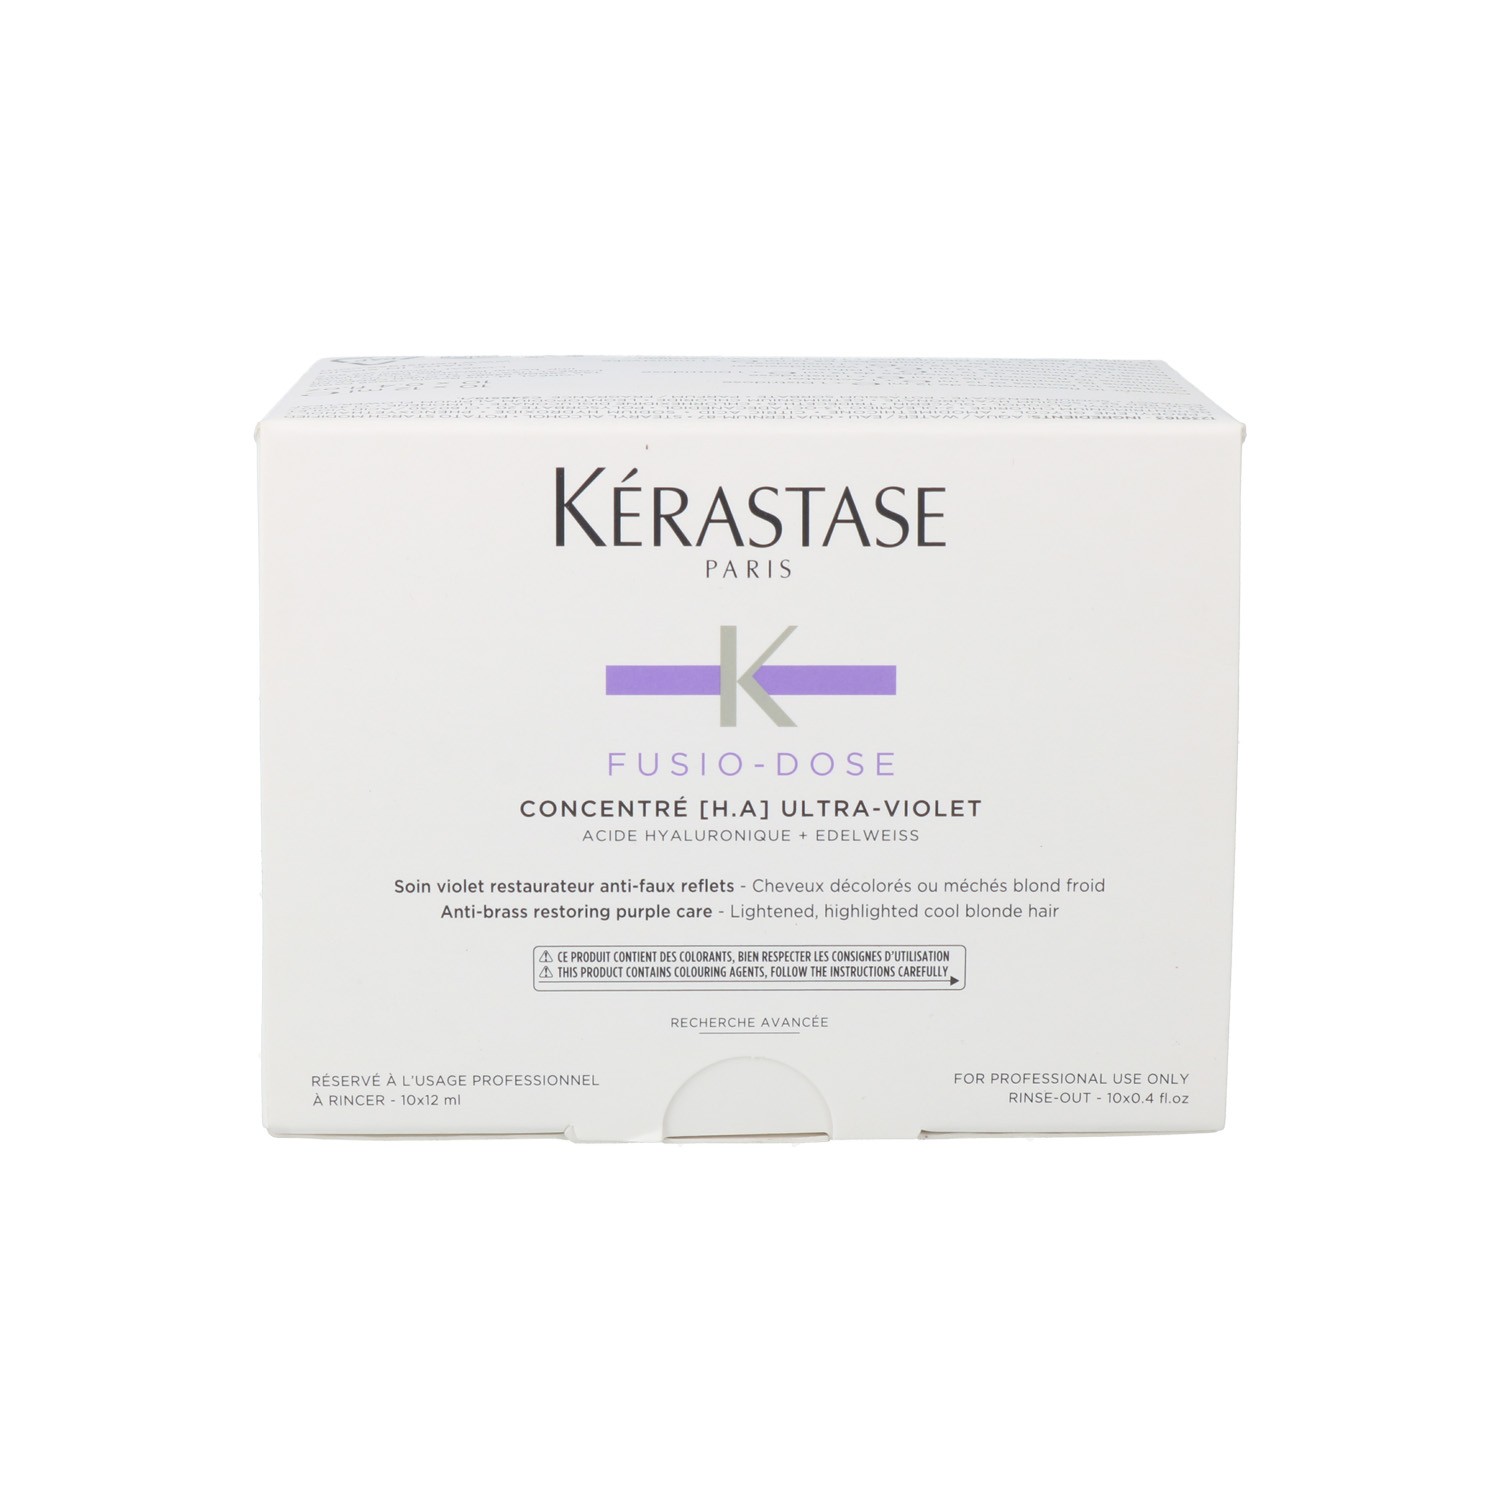 Kérastase Blond Absolute Cicaextreme Concentrated Uv Treatment 10x12ml